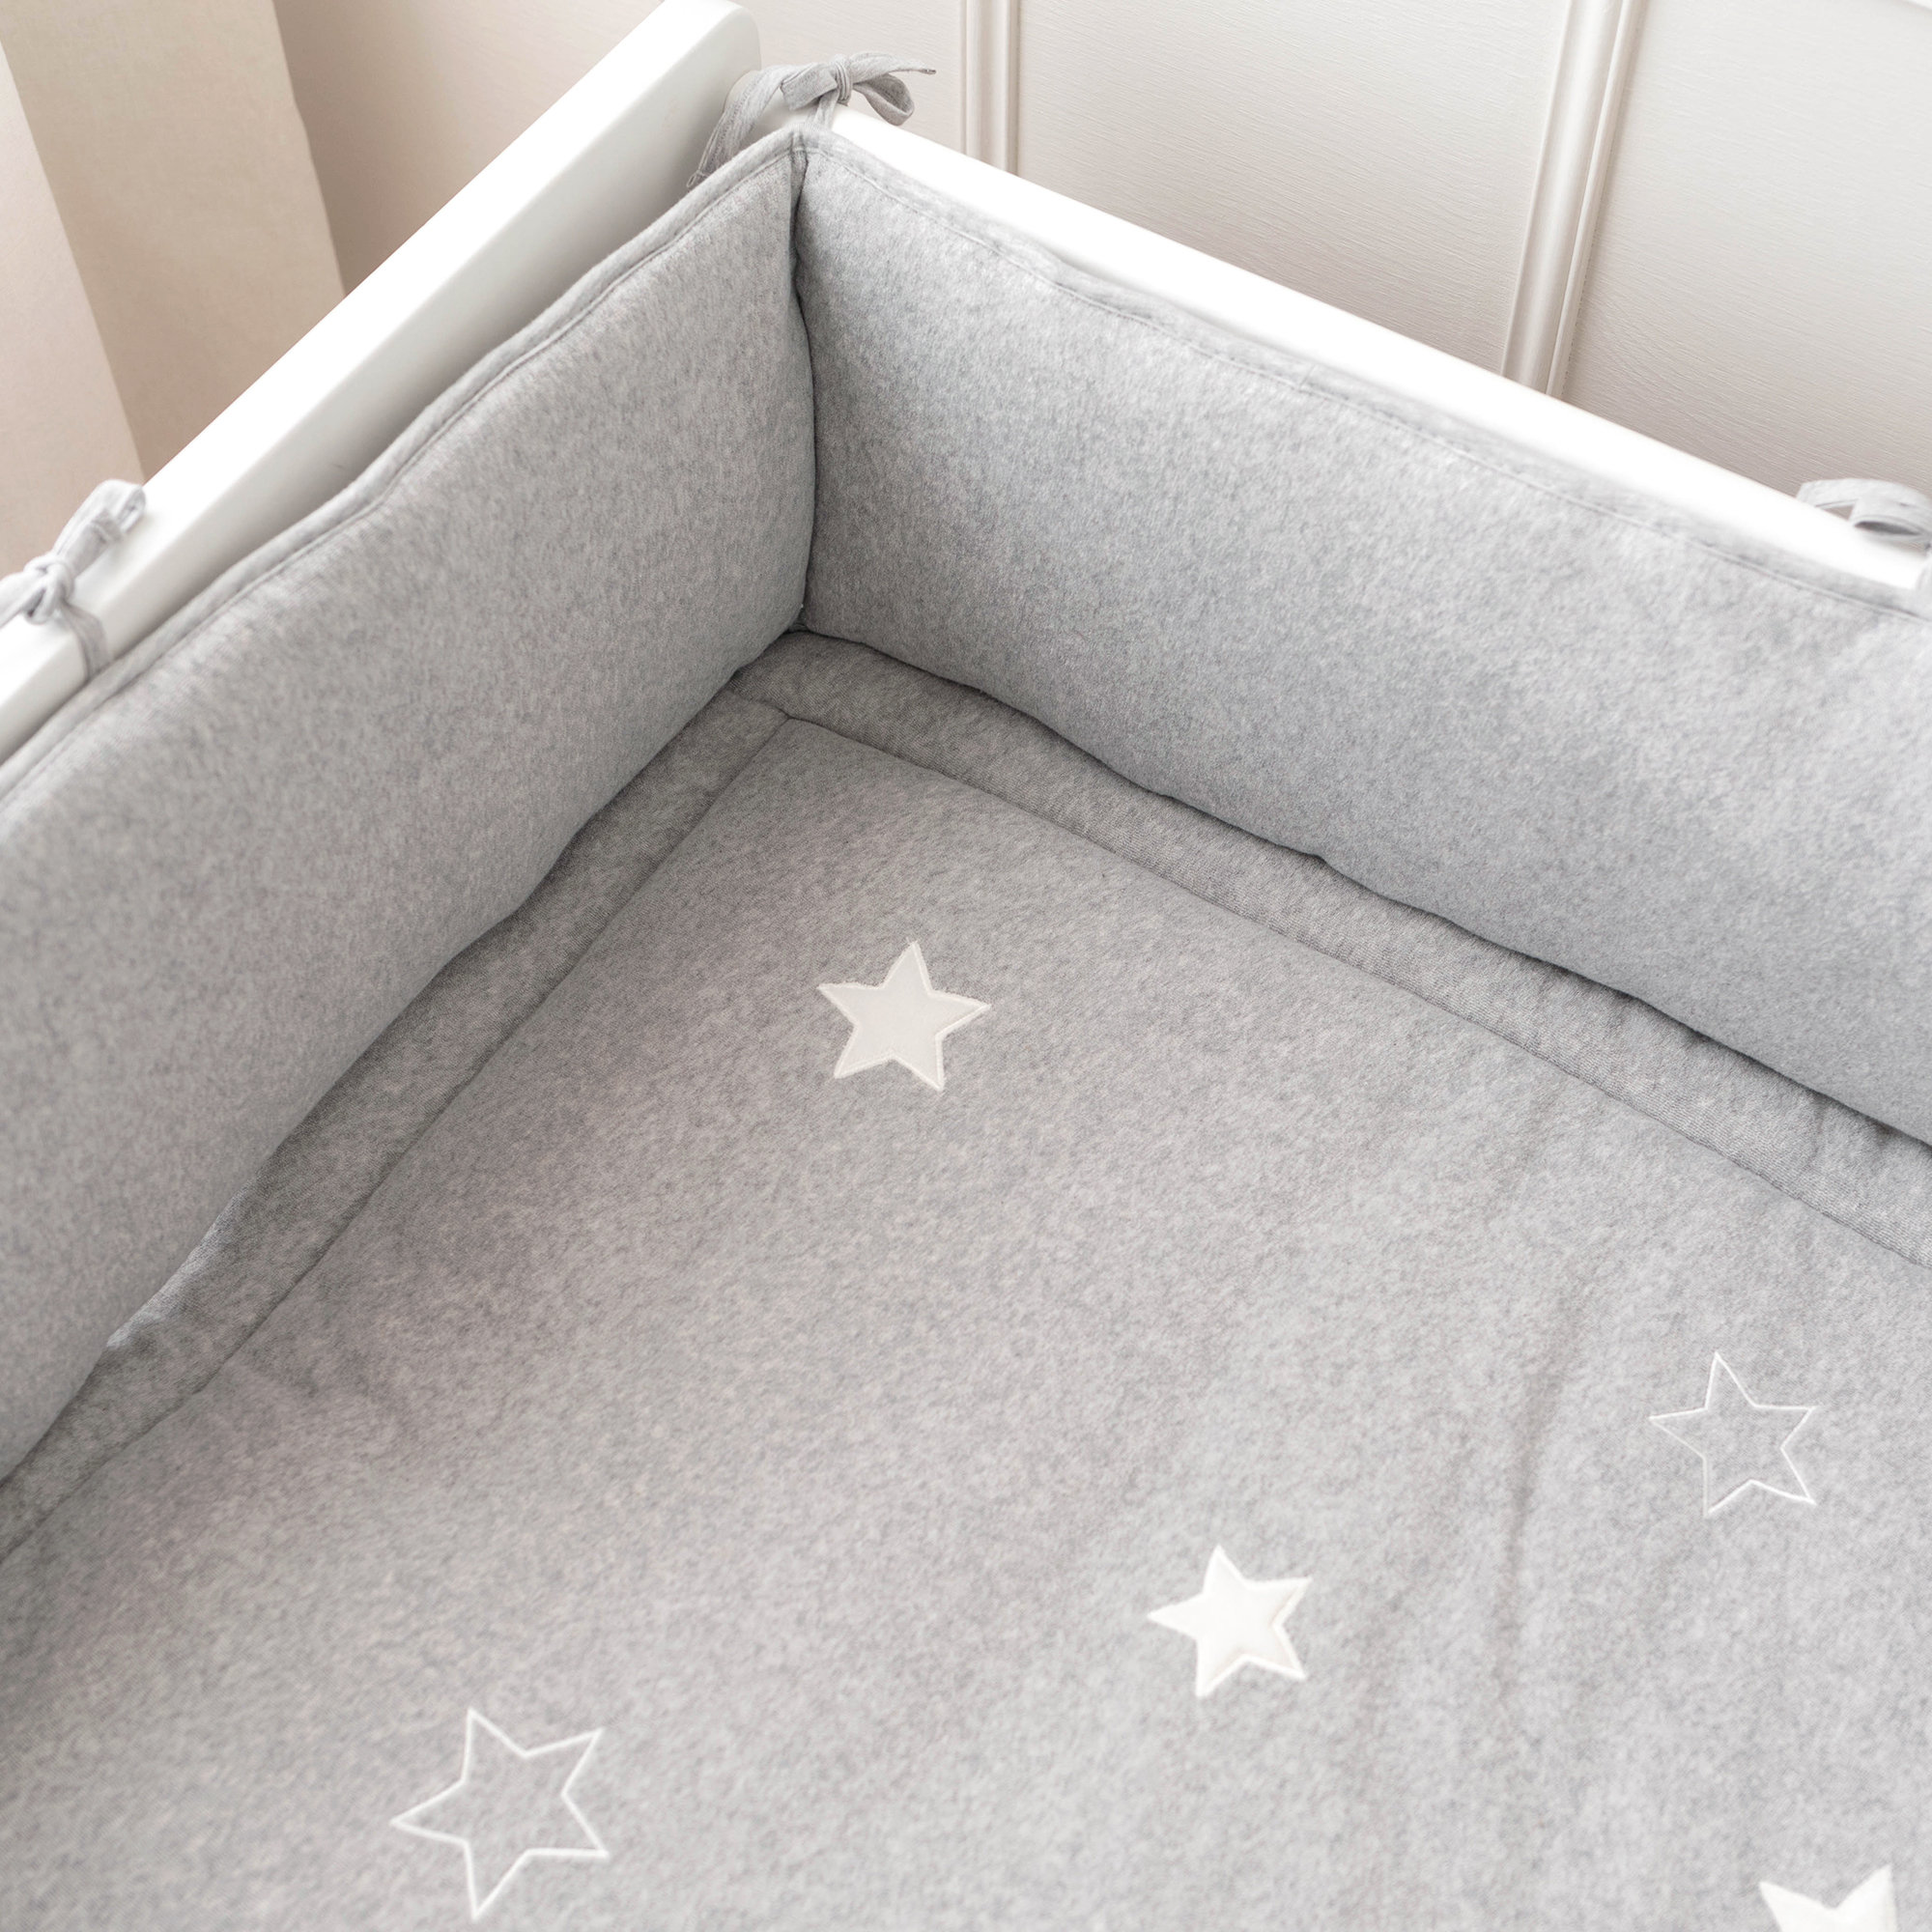 Playpen bumper Pady terry + terry 100x100x28cm STARY Grey marled